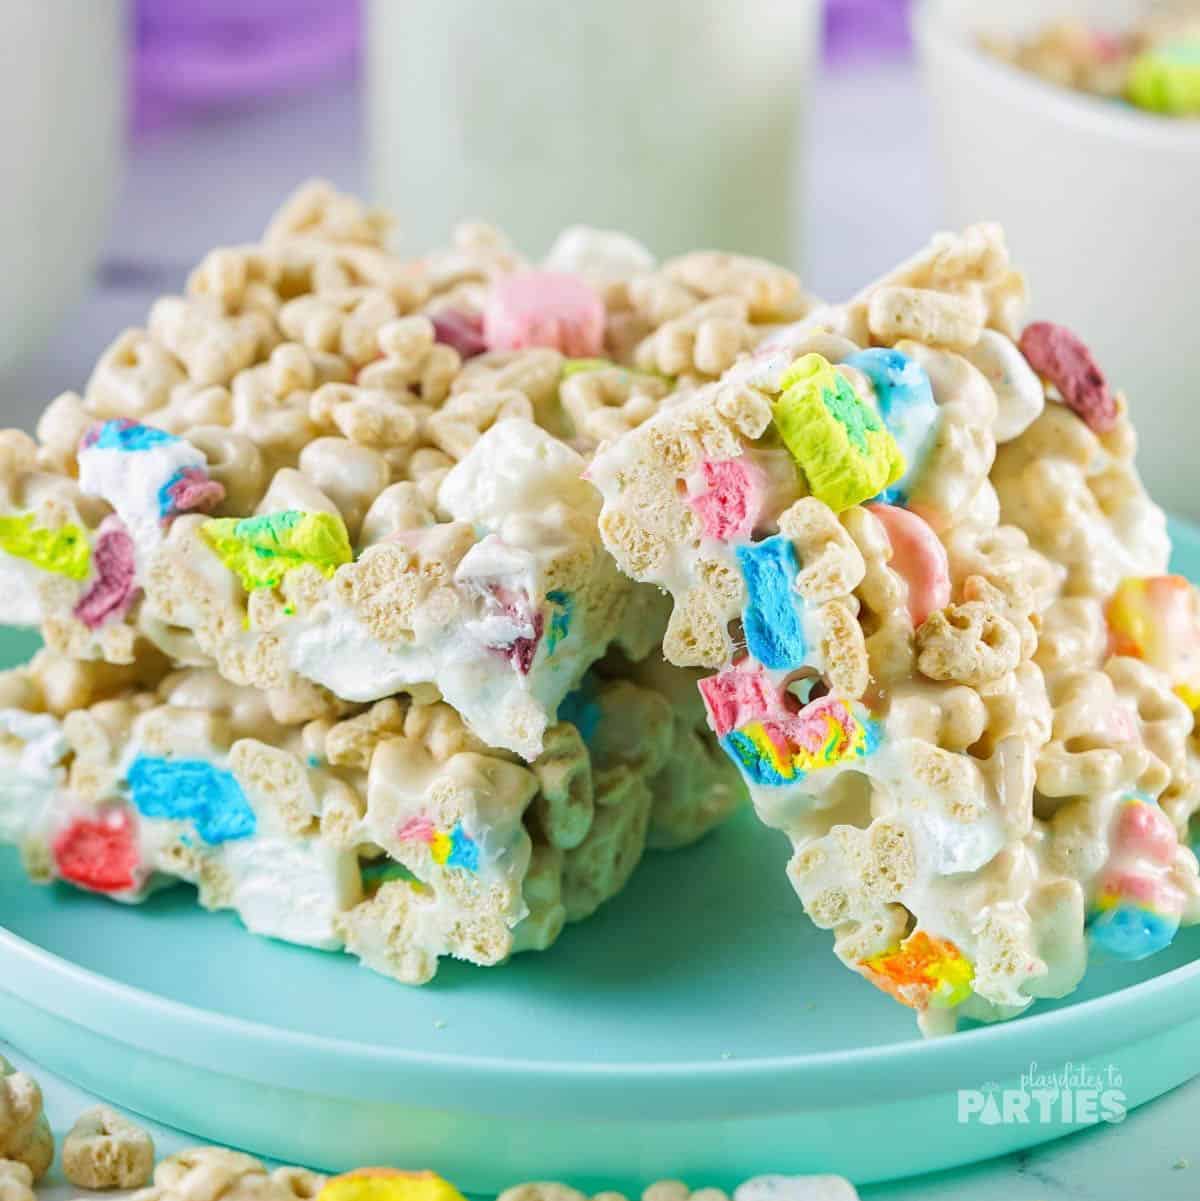 St Patrick's Day cereal treats on an aqua plate.